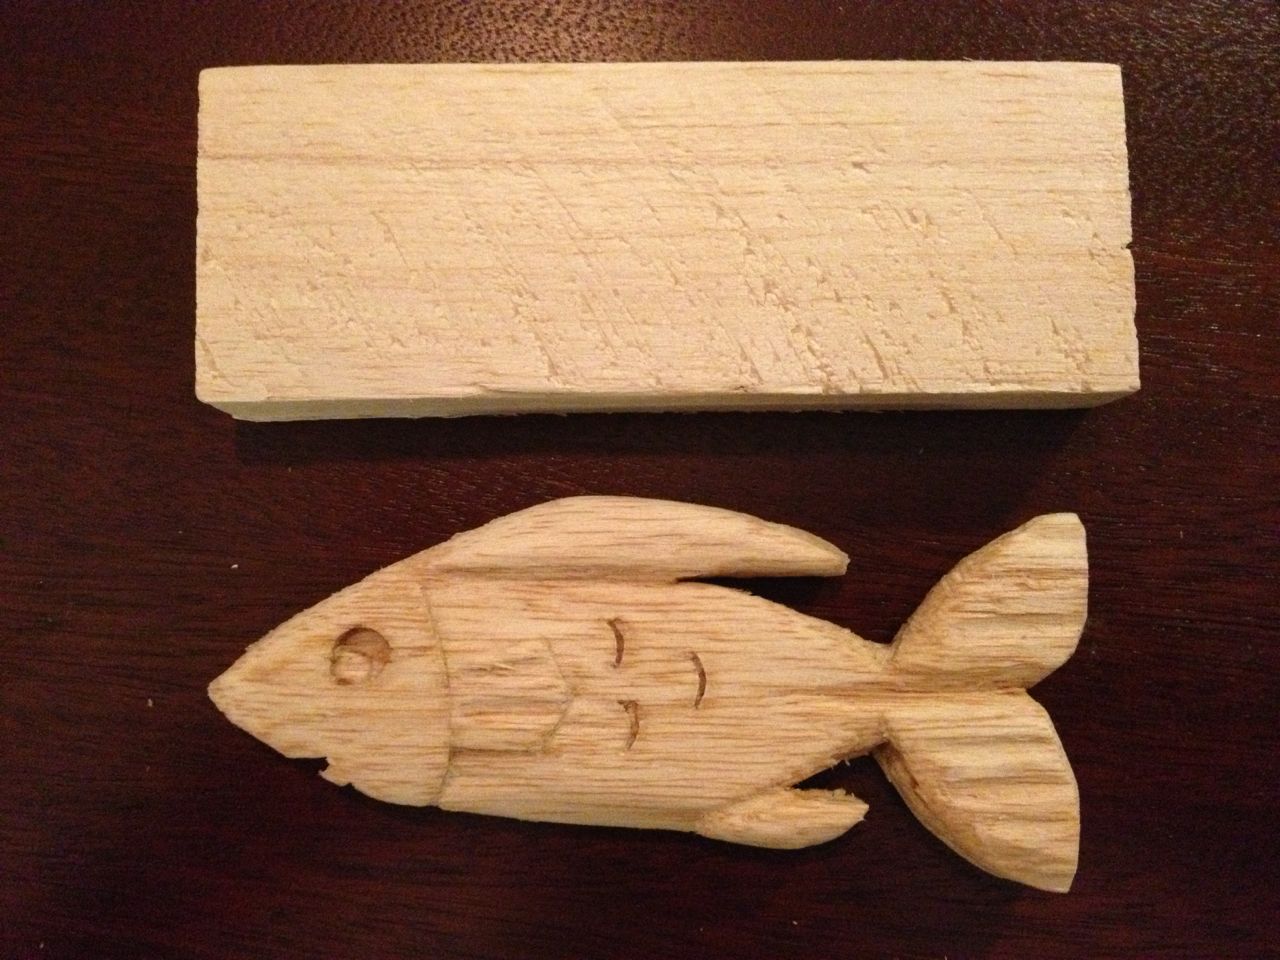 easy wood carving projects for kids